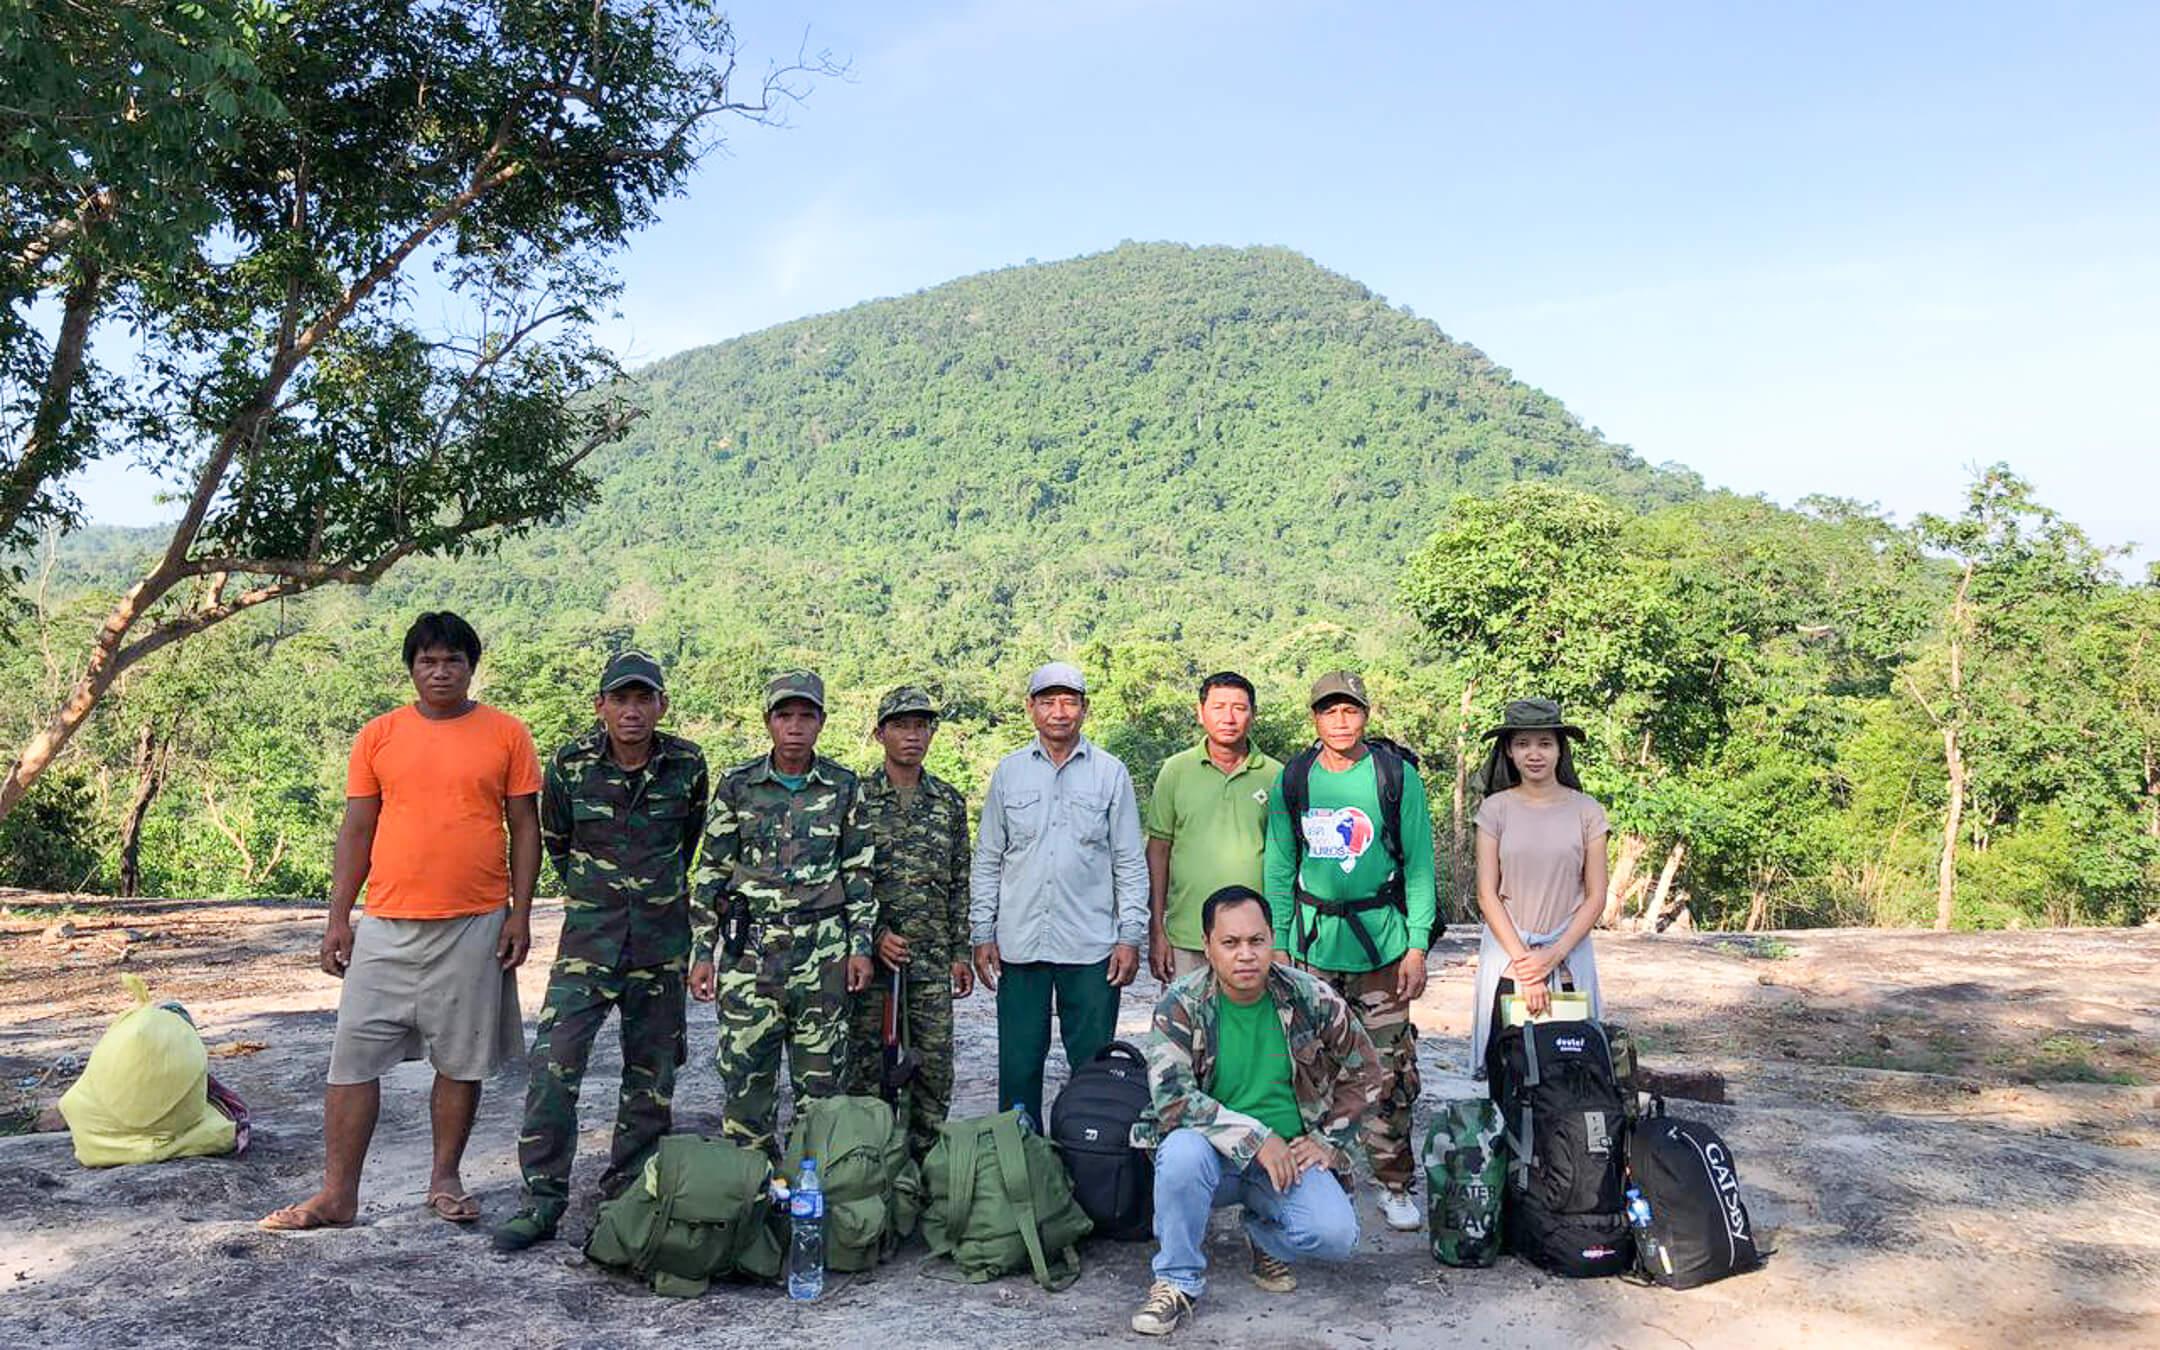 Youth advocates are able to work within Southeast Asia’s many national parks and conservation sites, assisting in a variety of tasks.
Photo: ASEAN Centre for Biodiversity
